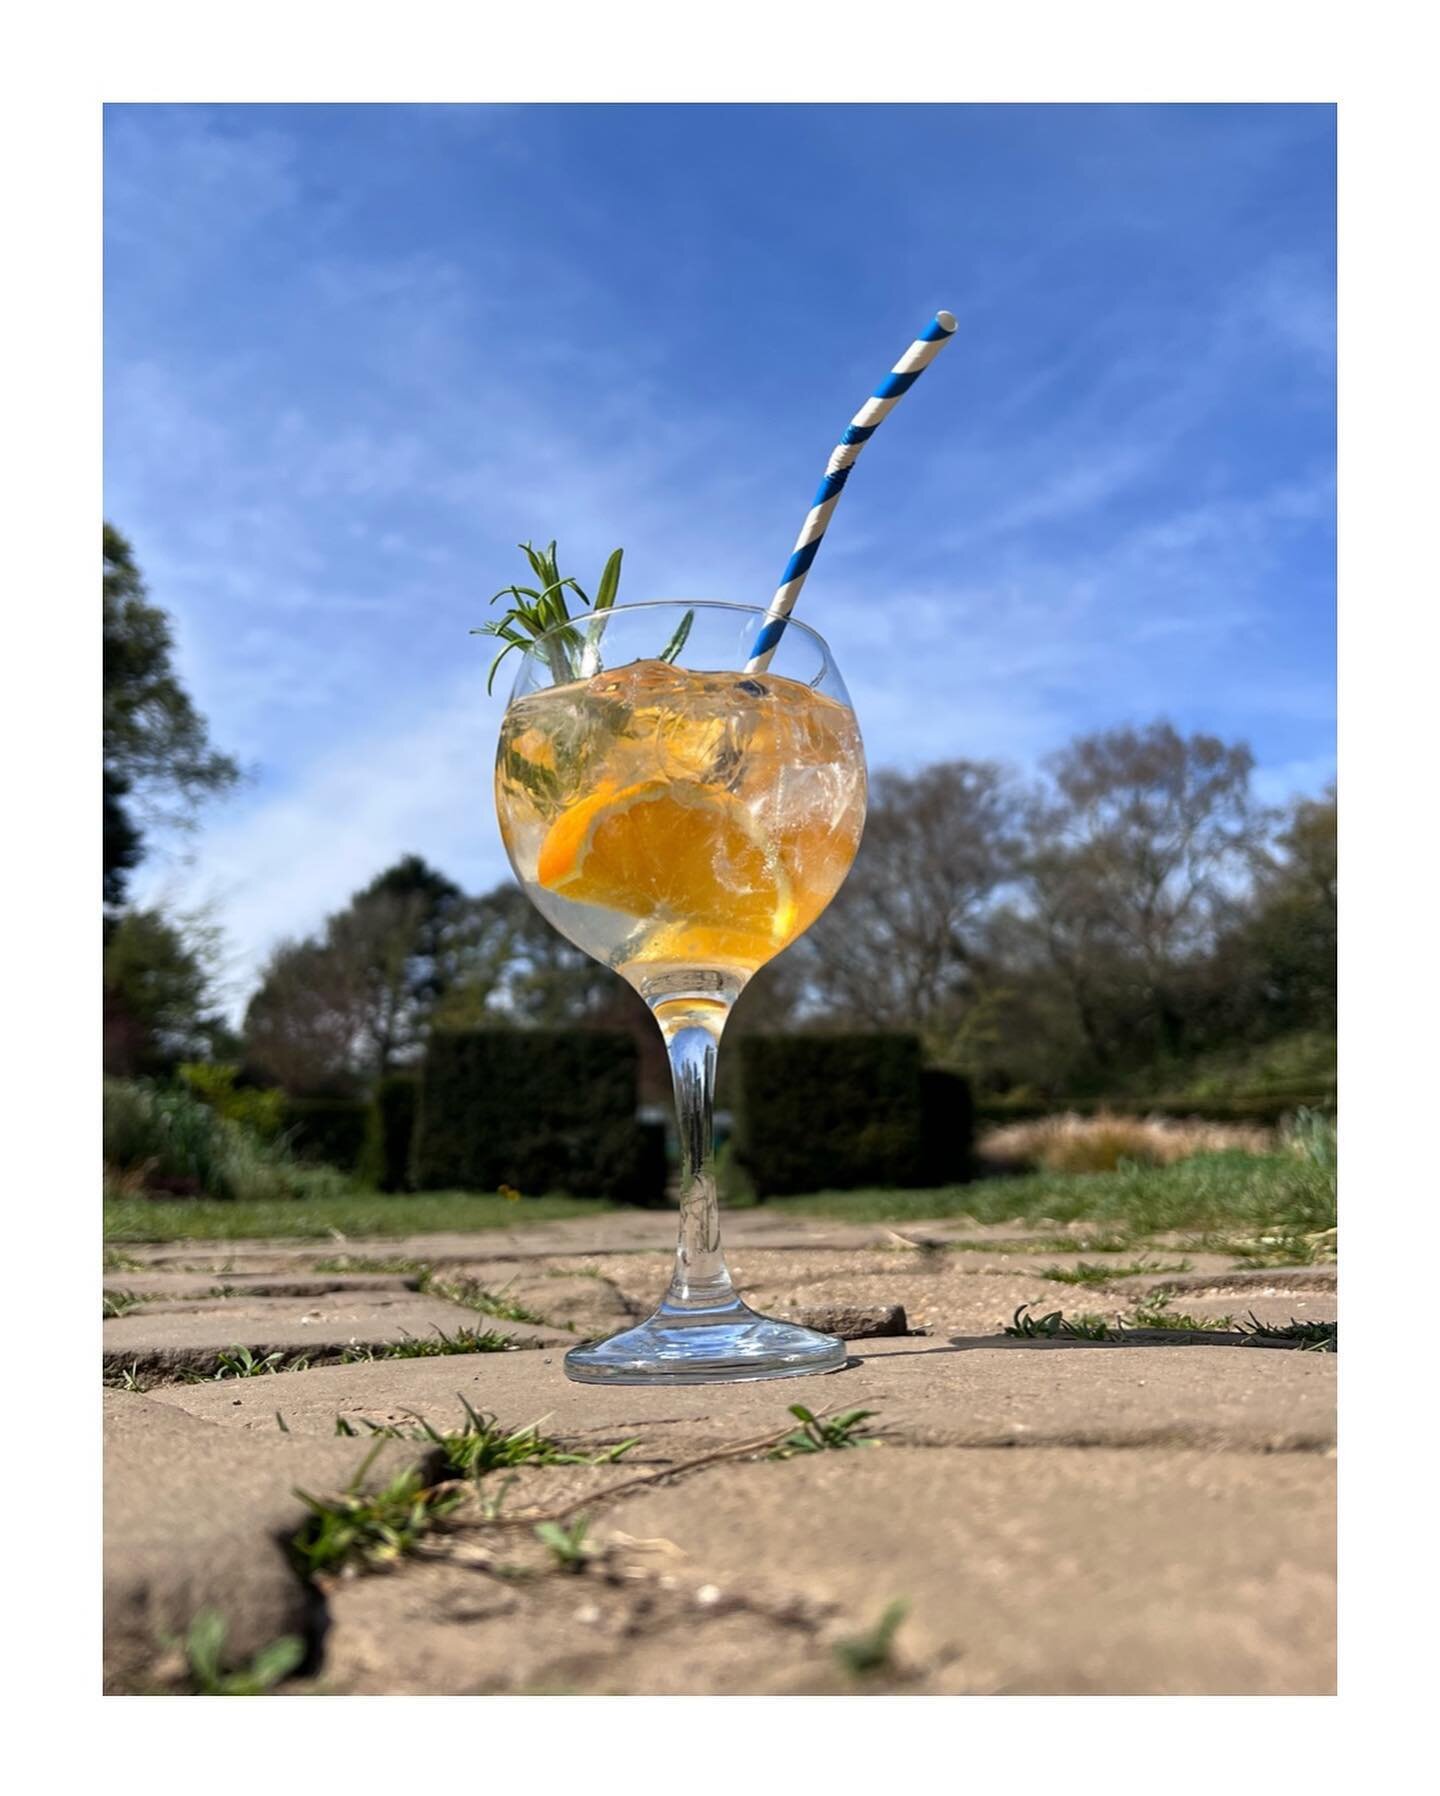 Come and enjoy a G&amp;T on our sunny terrace with amazing views of the maze, open air theatre and the sea! 🌞🌊

#ginoclock #timeforgin #sunnydays #spring #springhassprung #summer #ginandtonic #brighton #drinkinbrighton #dykeroadparkcafe #cafe